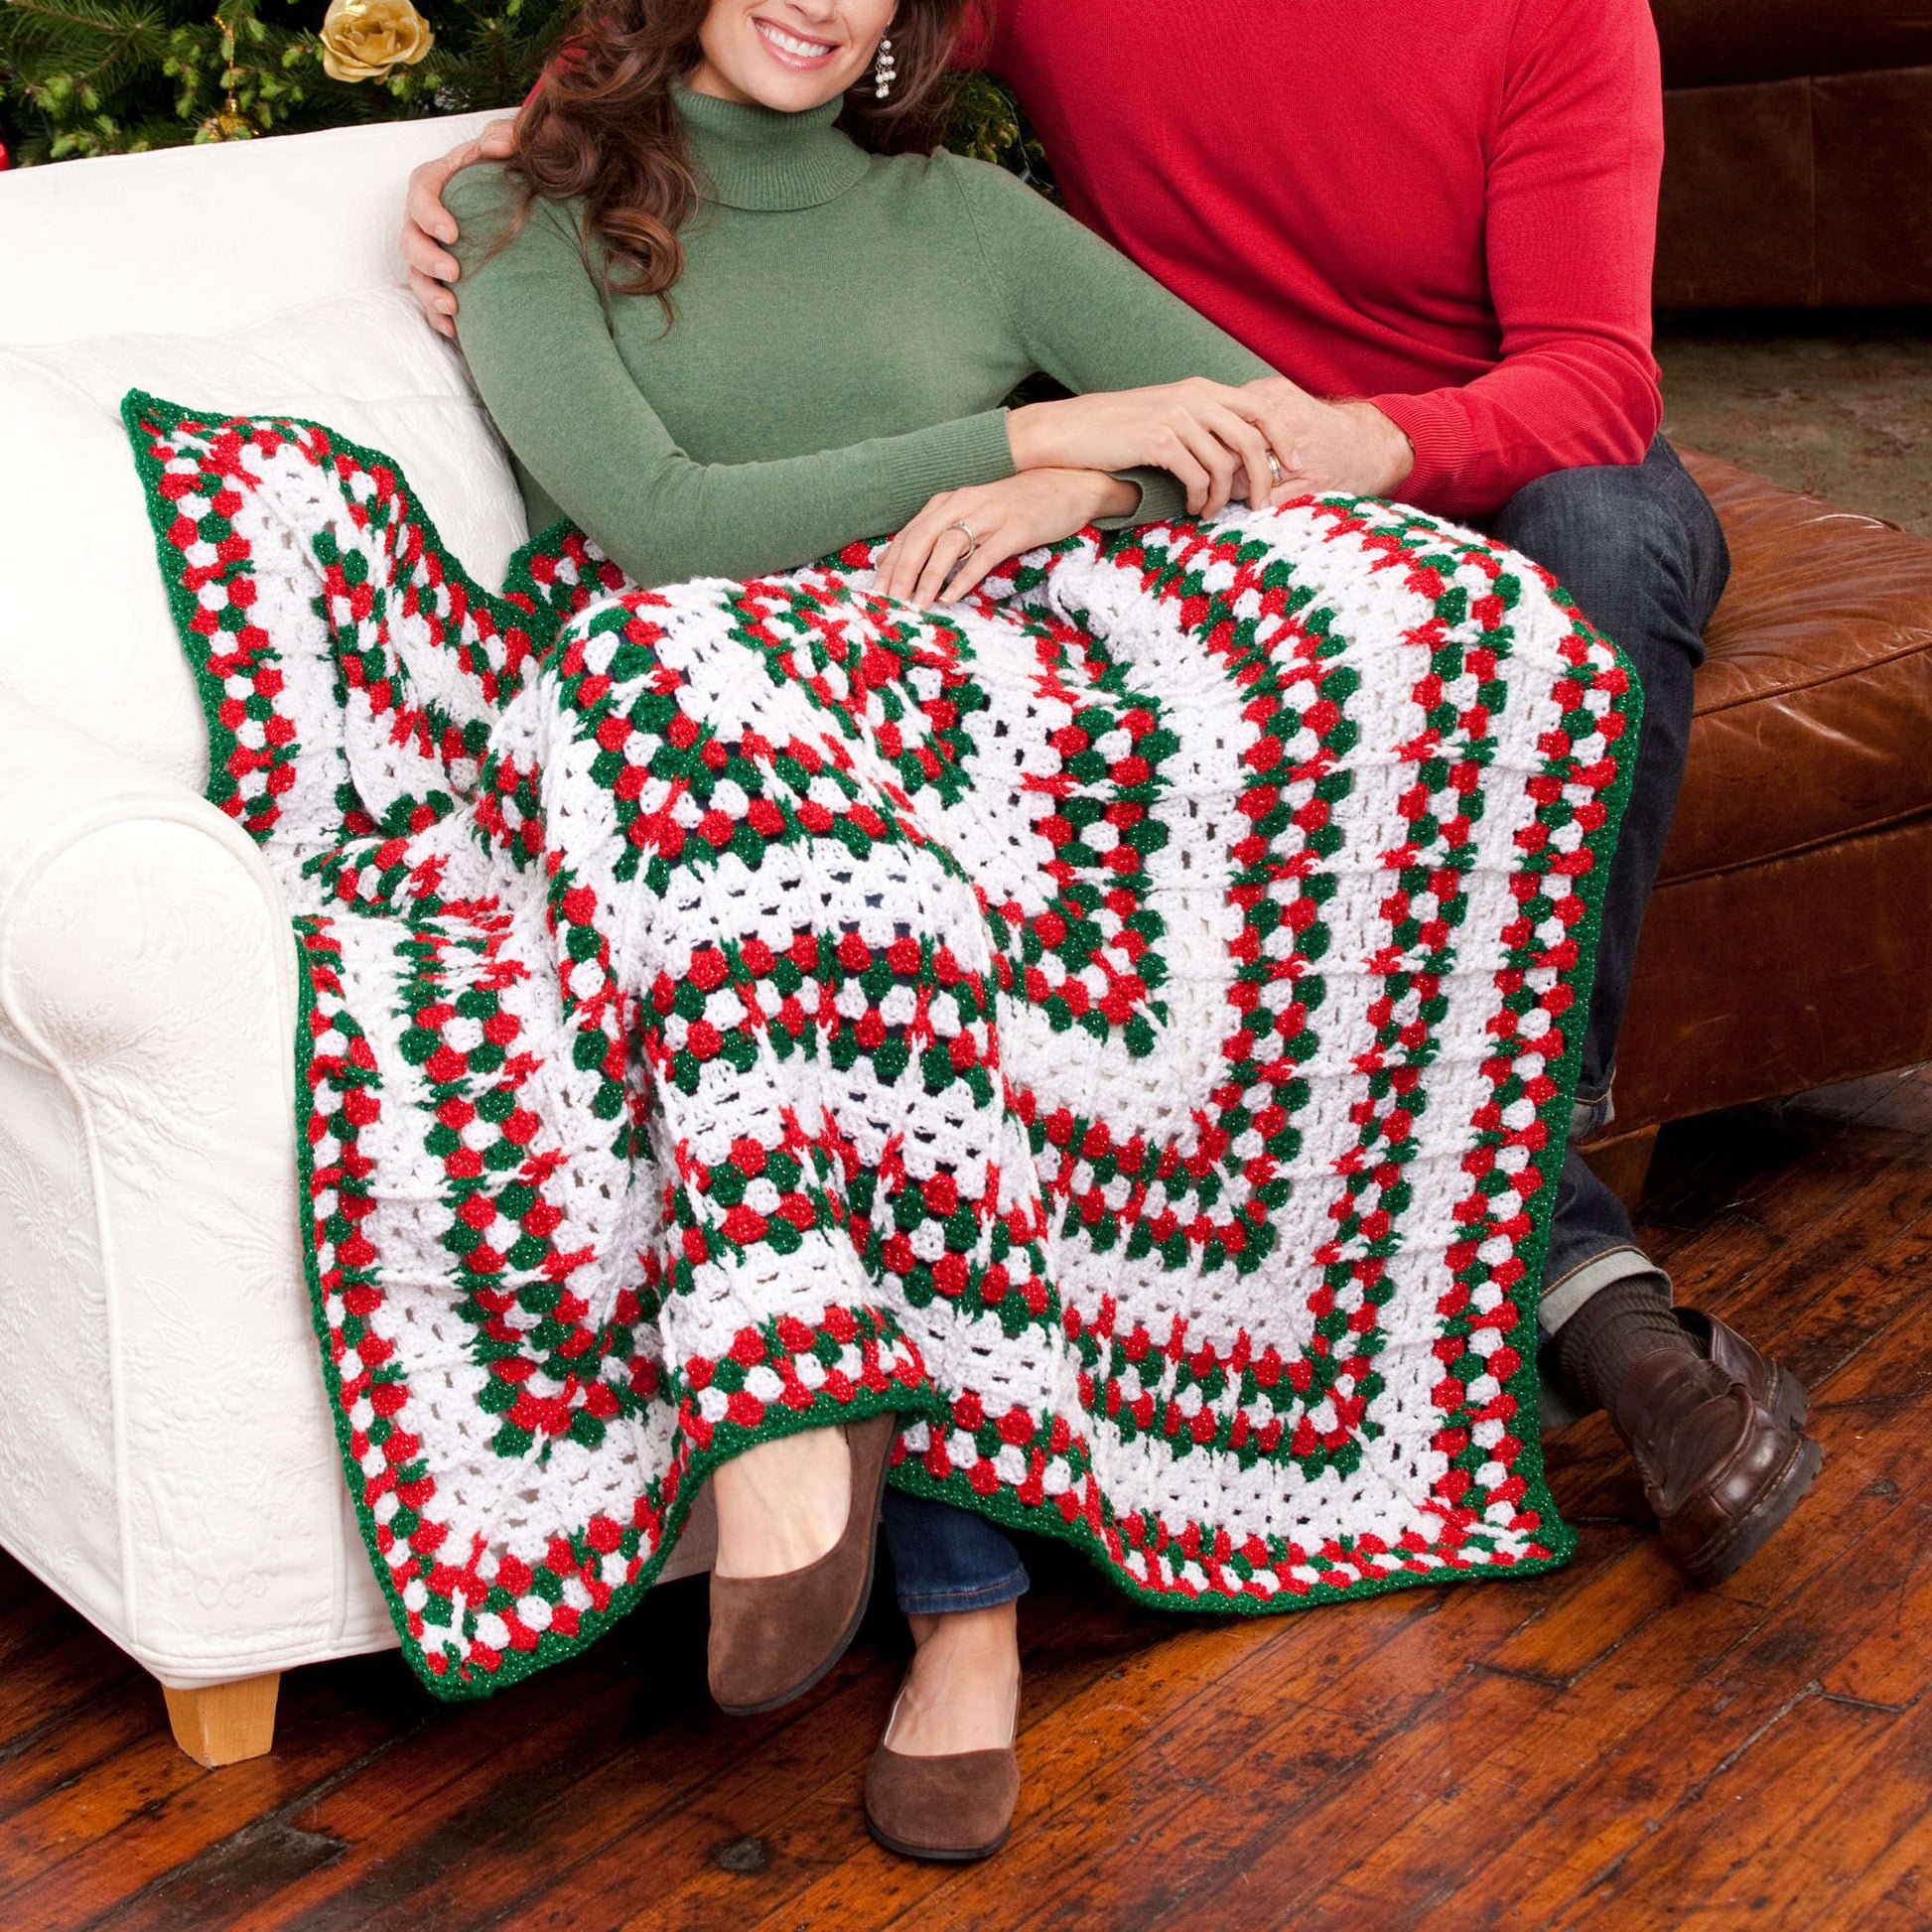 Free Red Heart Holiday Throw Crochet Pattern